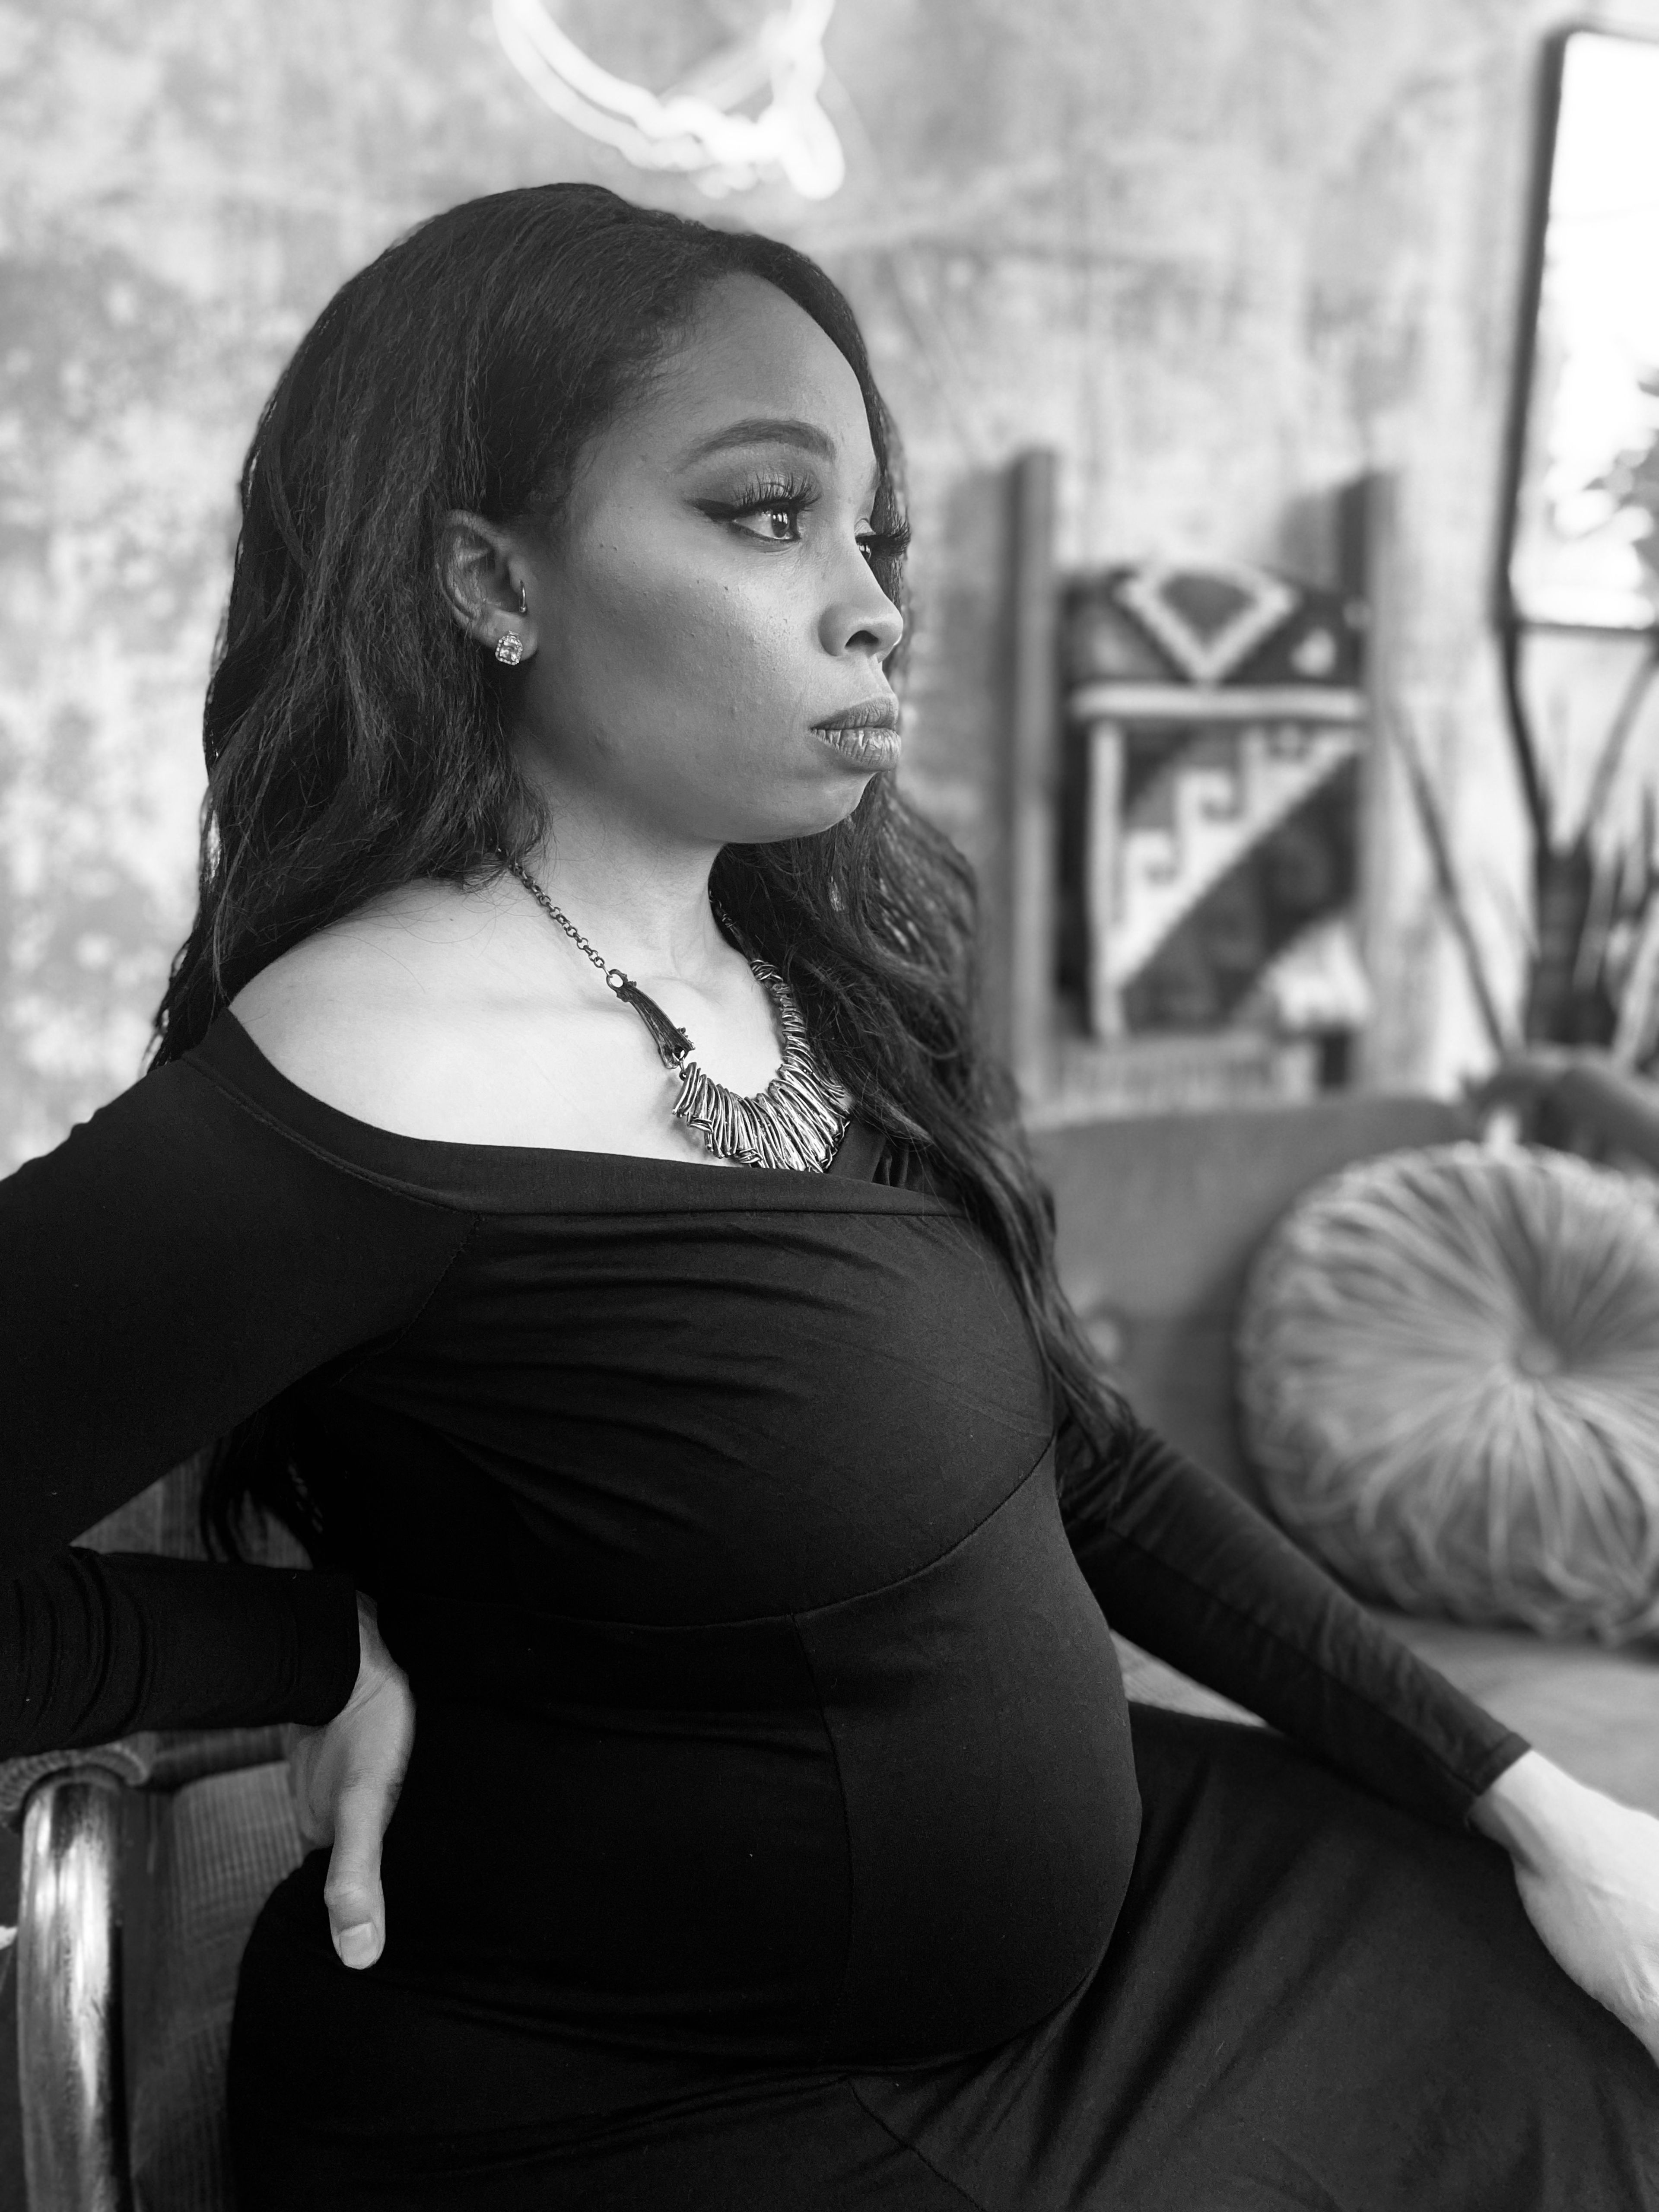 A maternity photoshoot of a woman sitting in a black chair, captured in black and white.